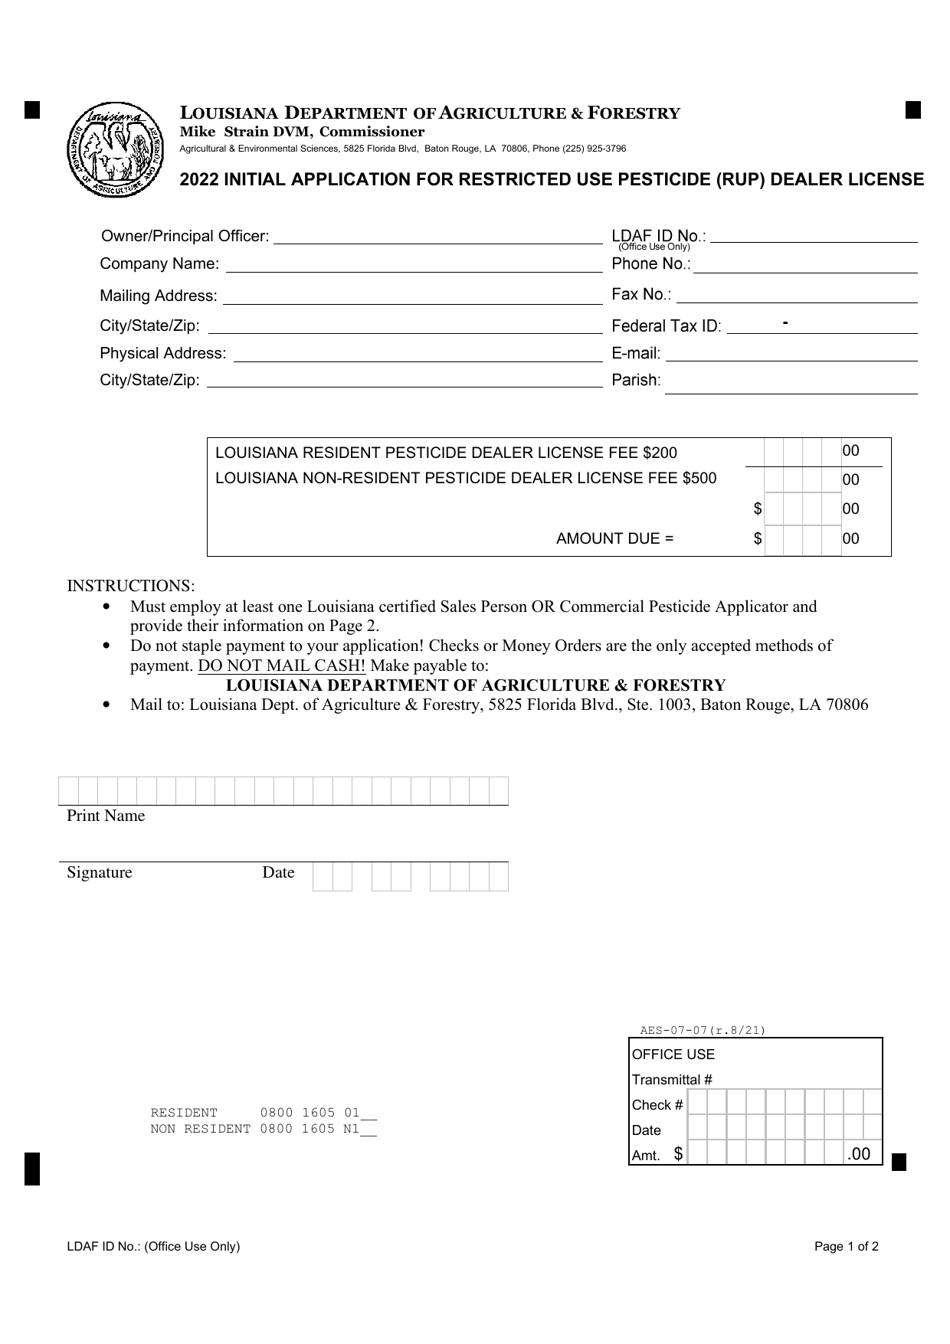 Form AES-07-07 Initial Application for Restricted Use Pesticide (Rup) Dealer License - Louisiana, Page 1